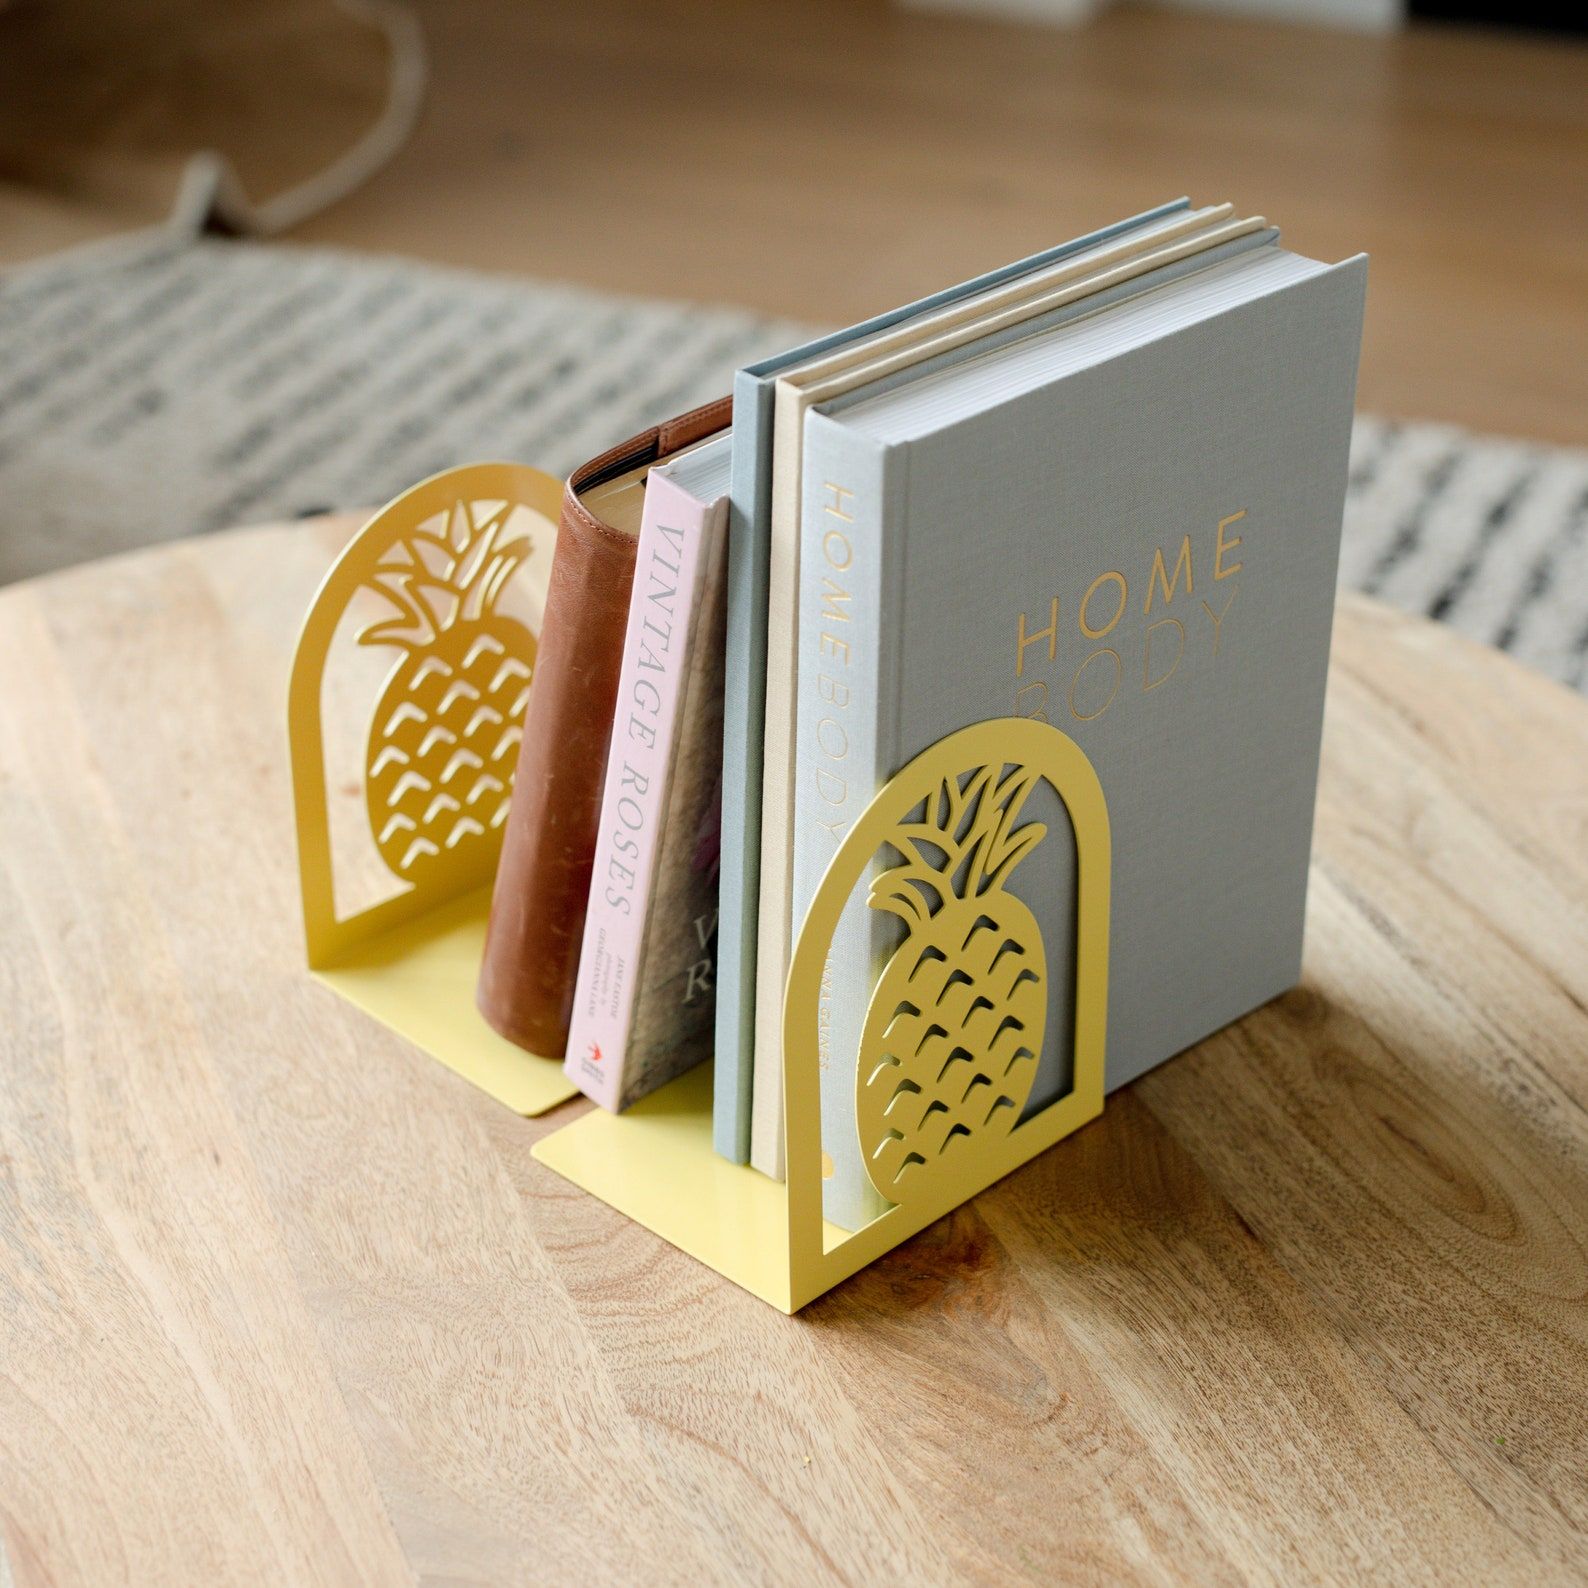 Two rounded yellow metal bookends shaped like pineapples.